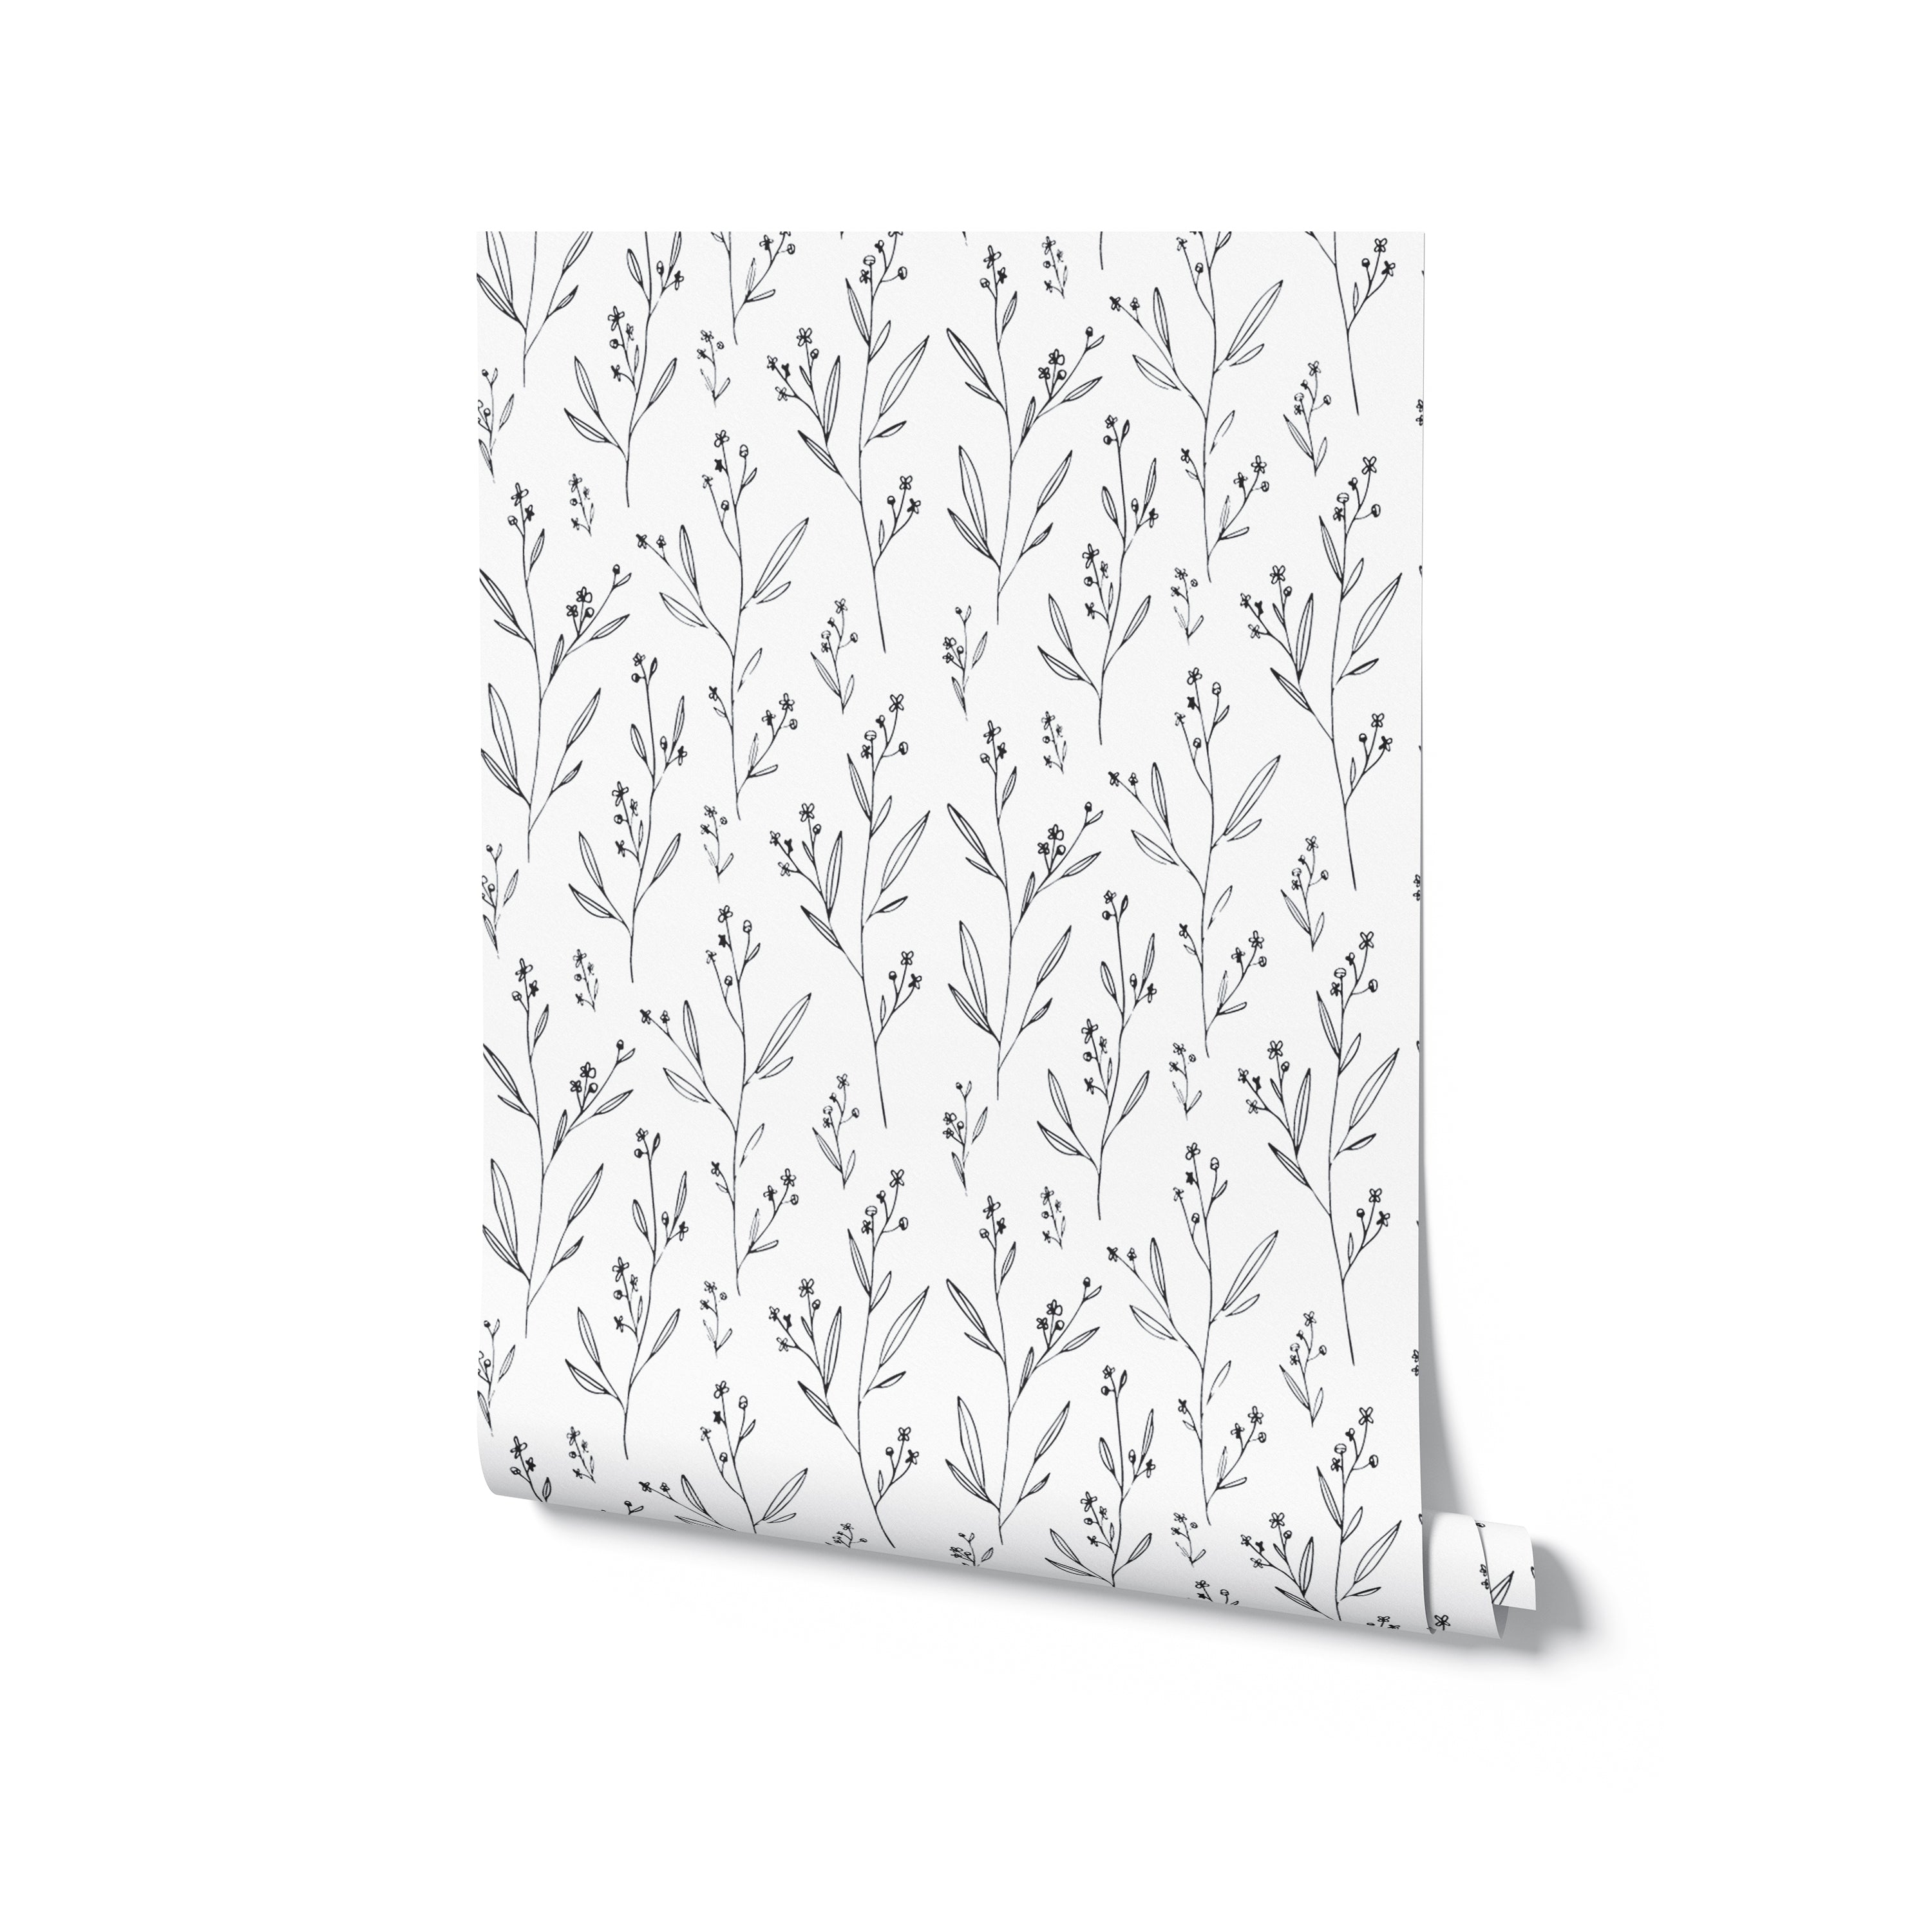 Roll of Dainty Minimal Floral Wallpaper displaying a repeating pattern of delicate linear flowers and leaves, exemplifying a simple yet sophisticated design ideal for modern and minimalist decor styles